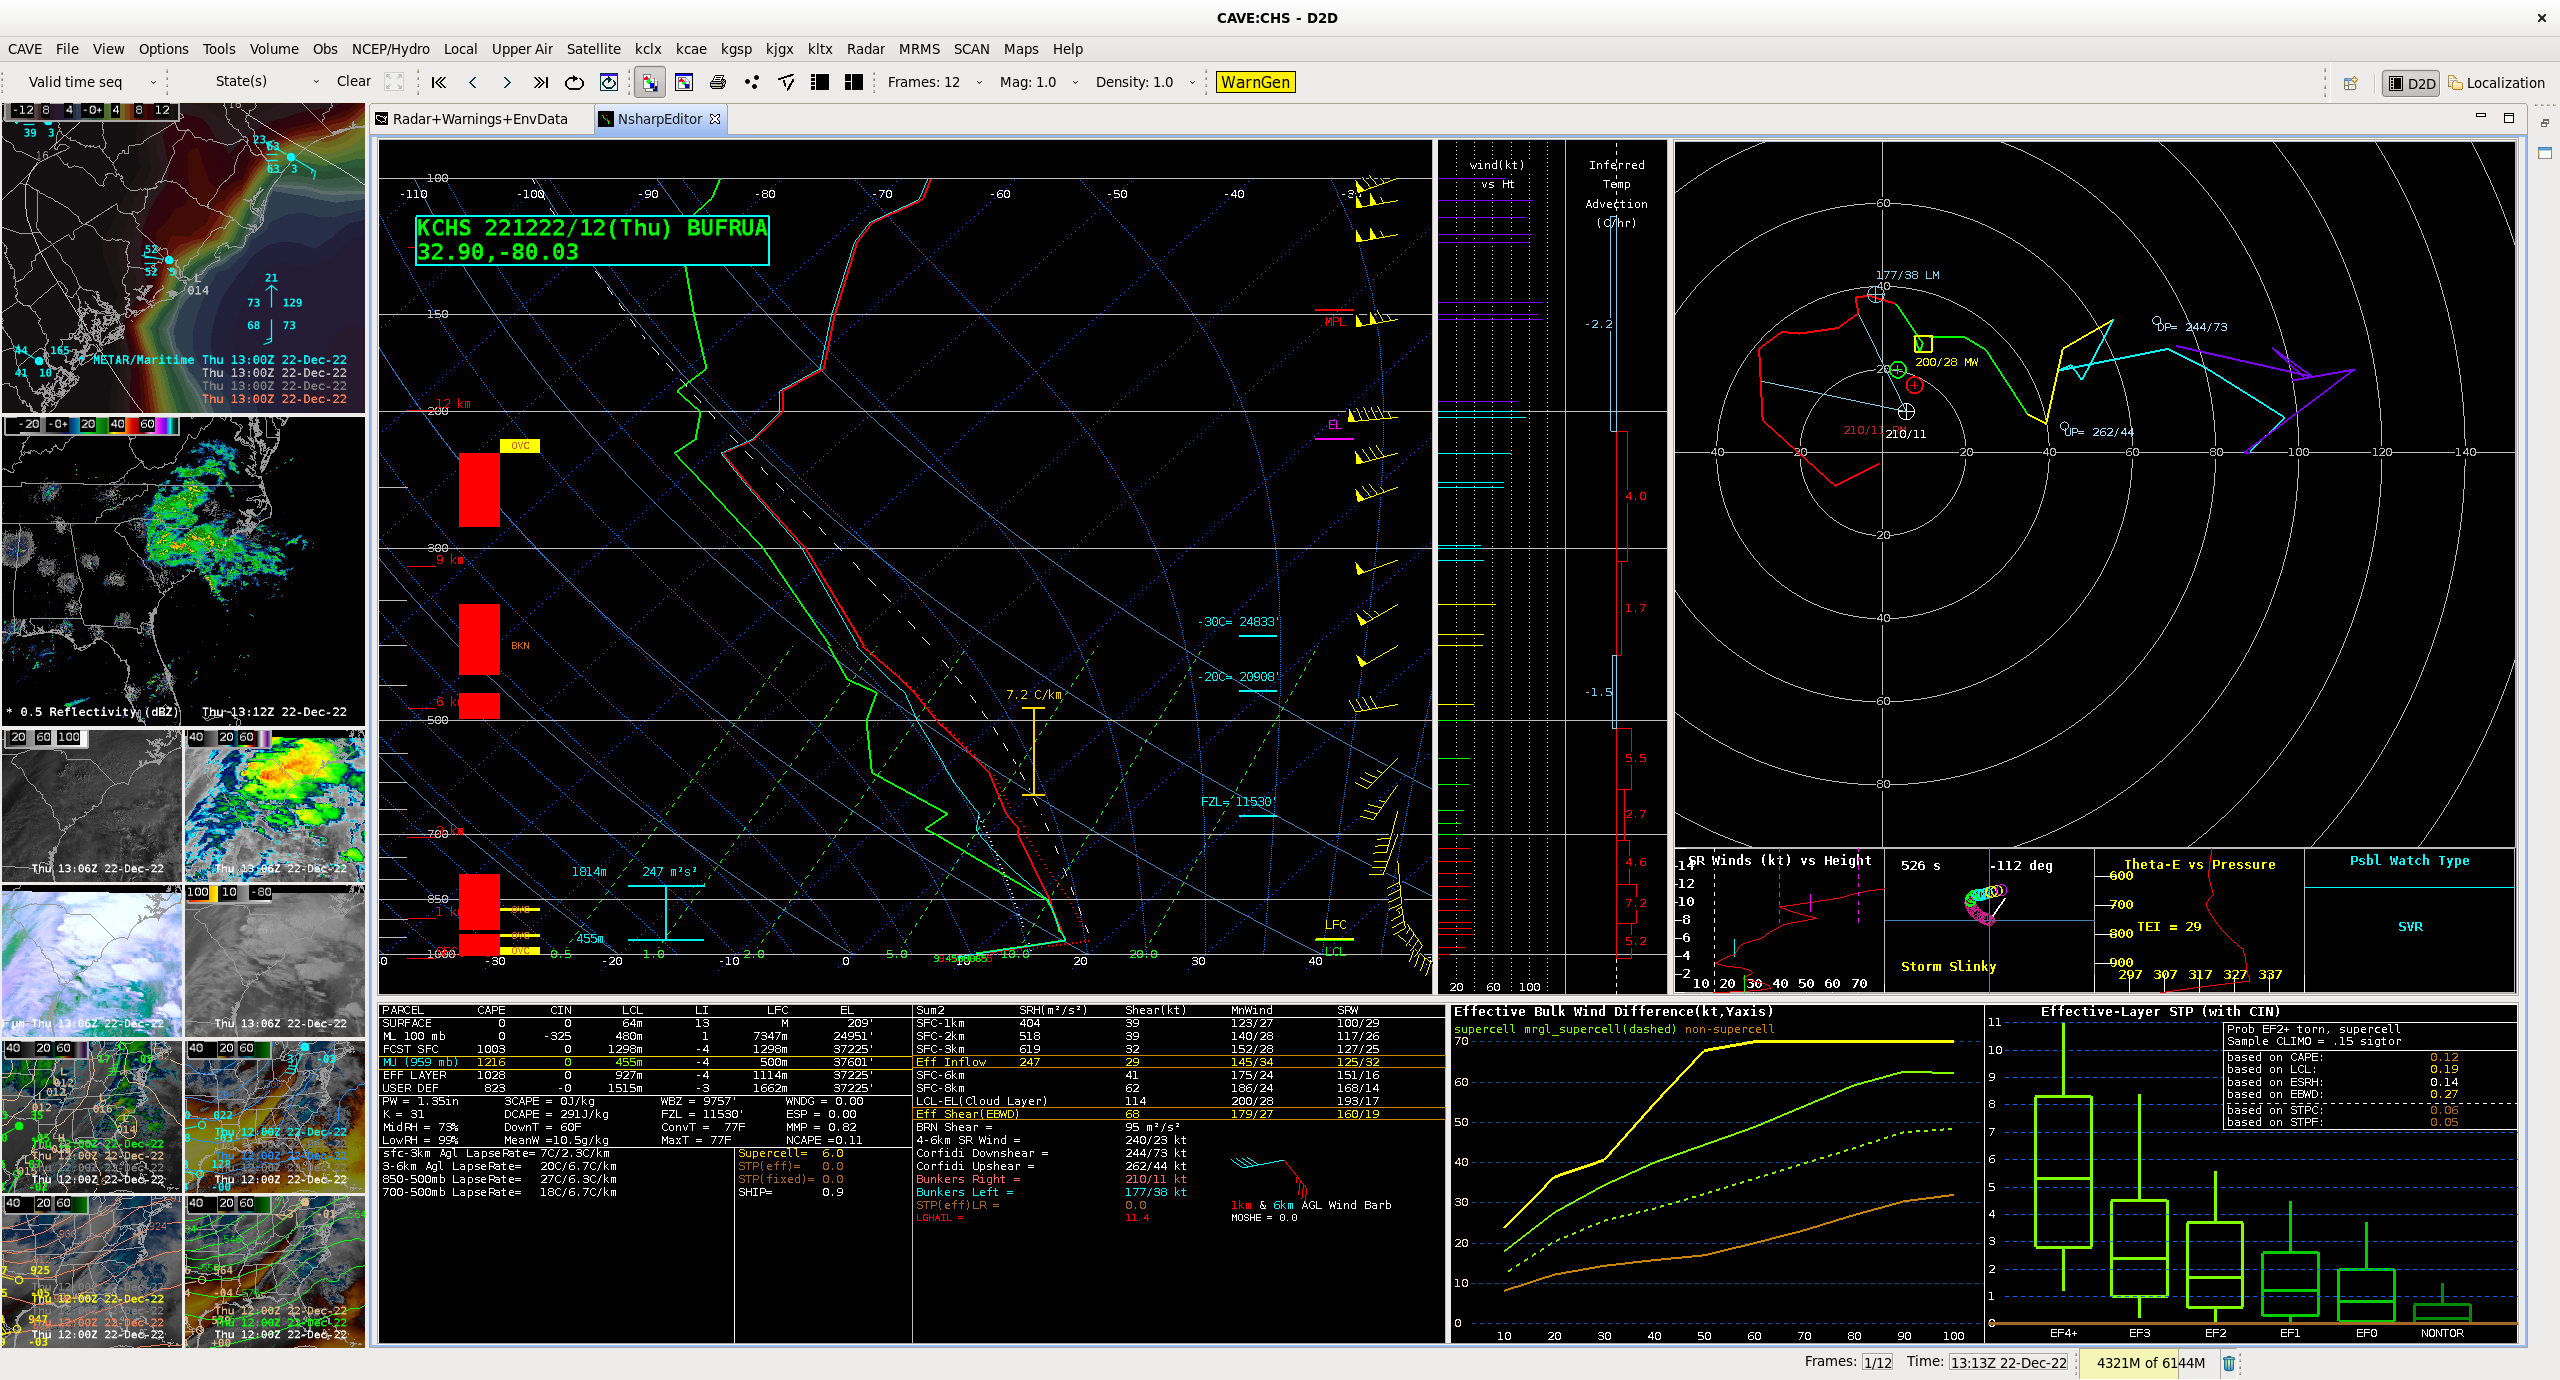 AWIPS II perspective primarily focused on the 12z sounding from KCHS.